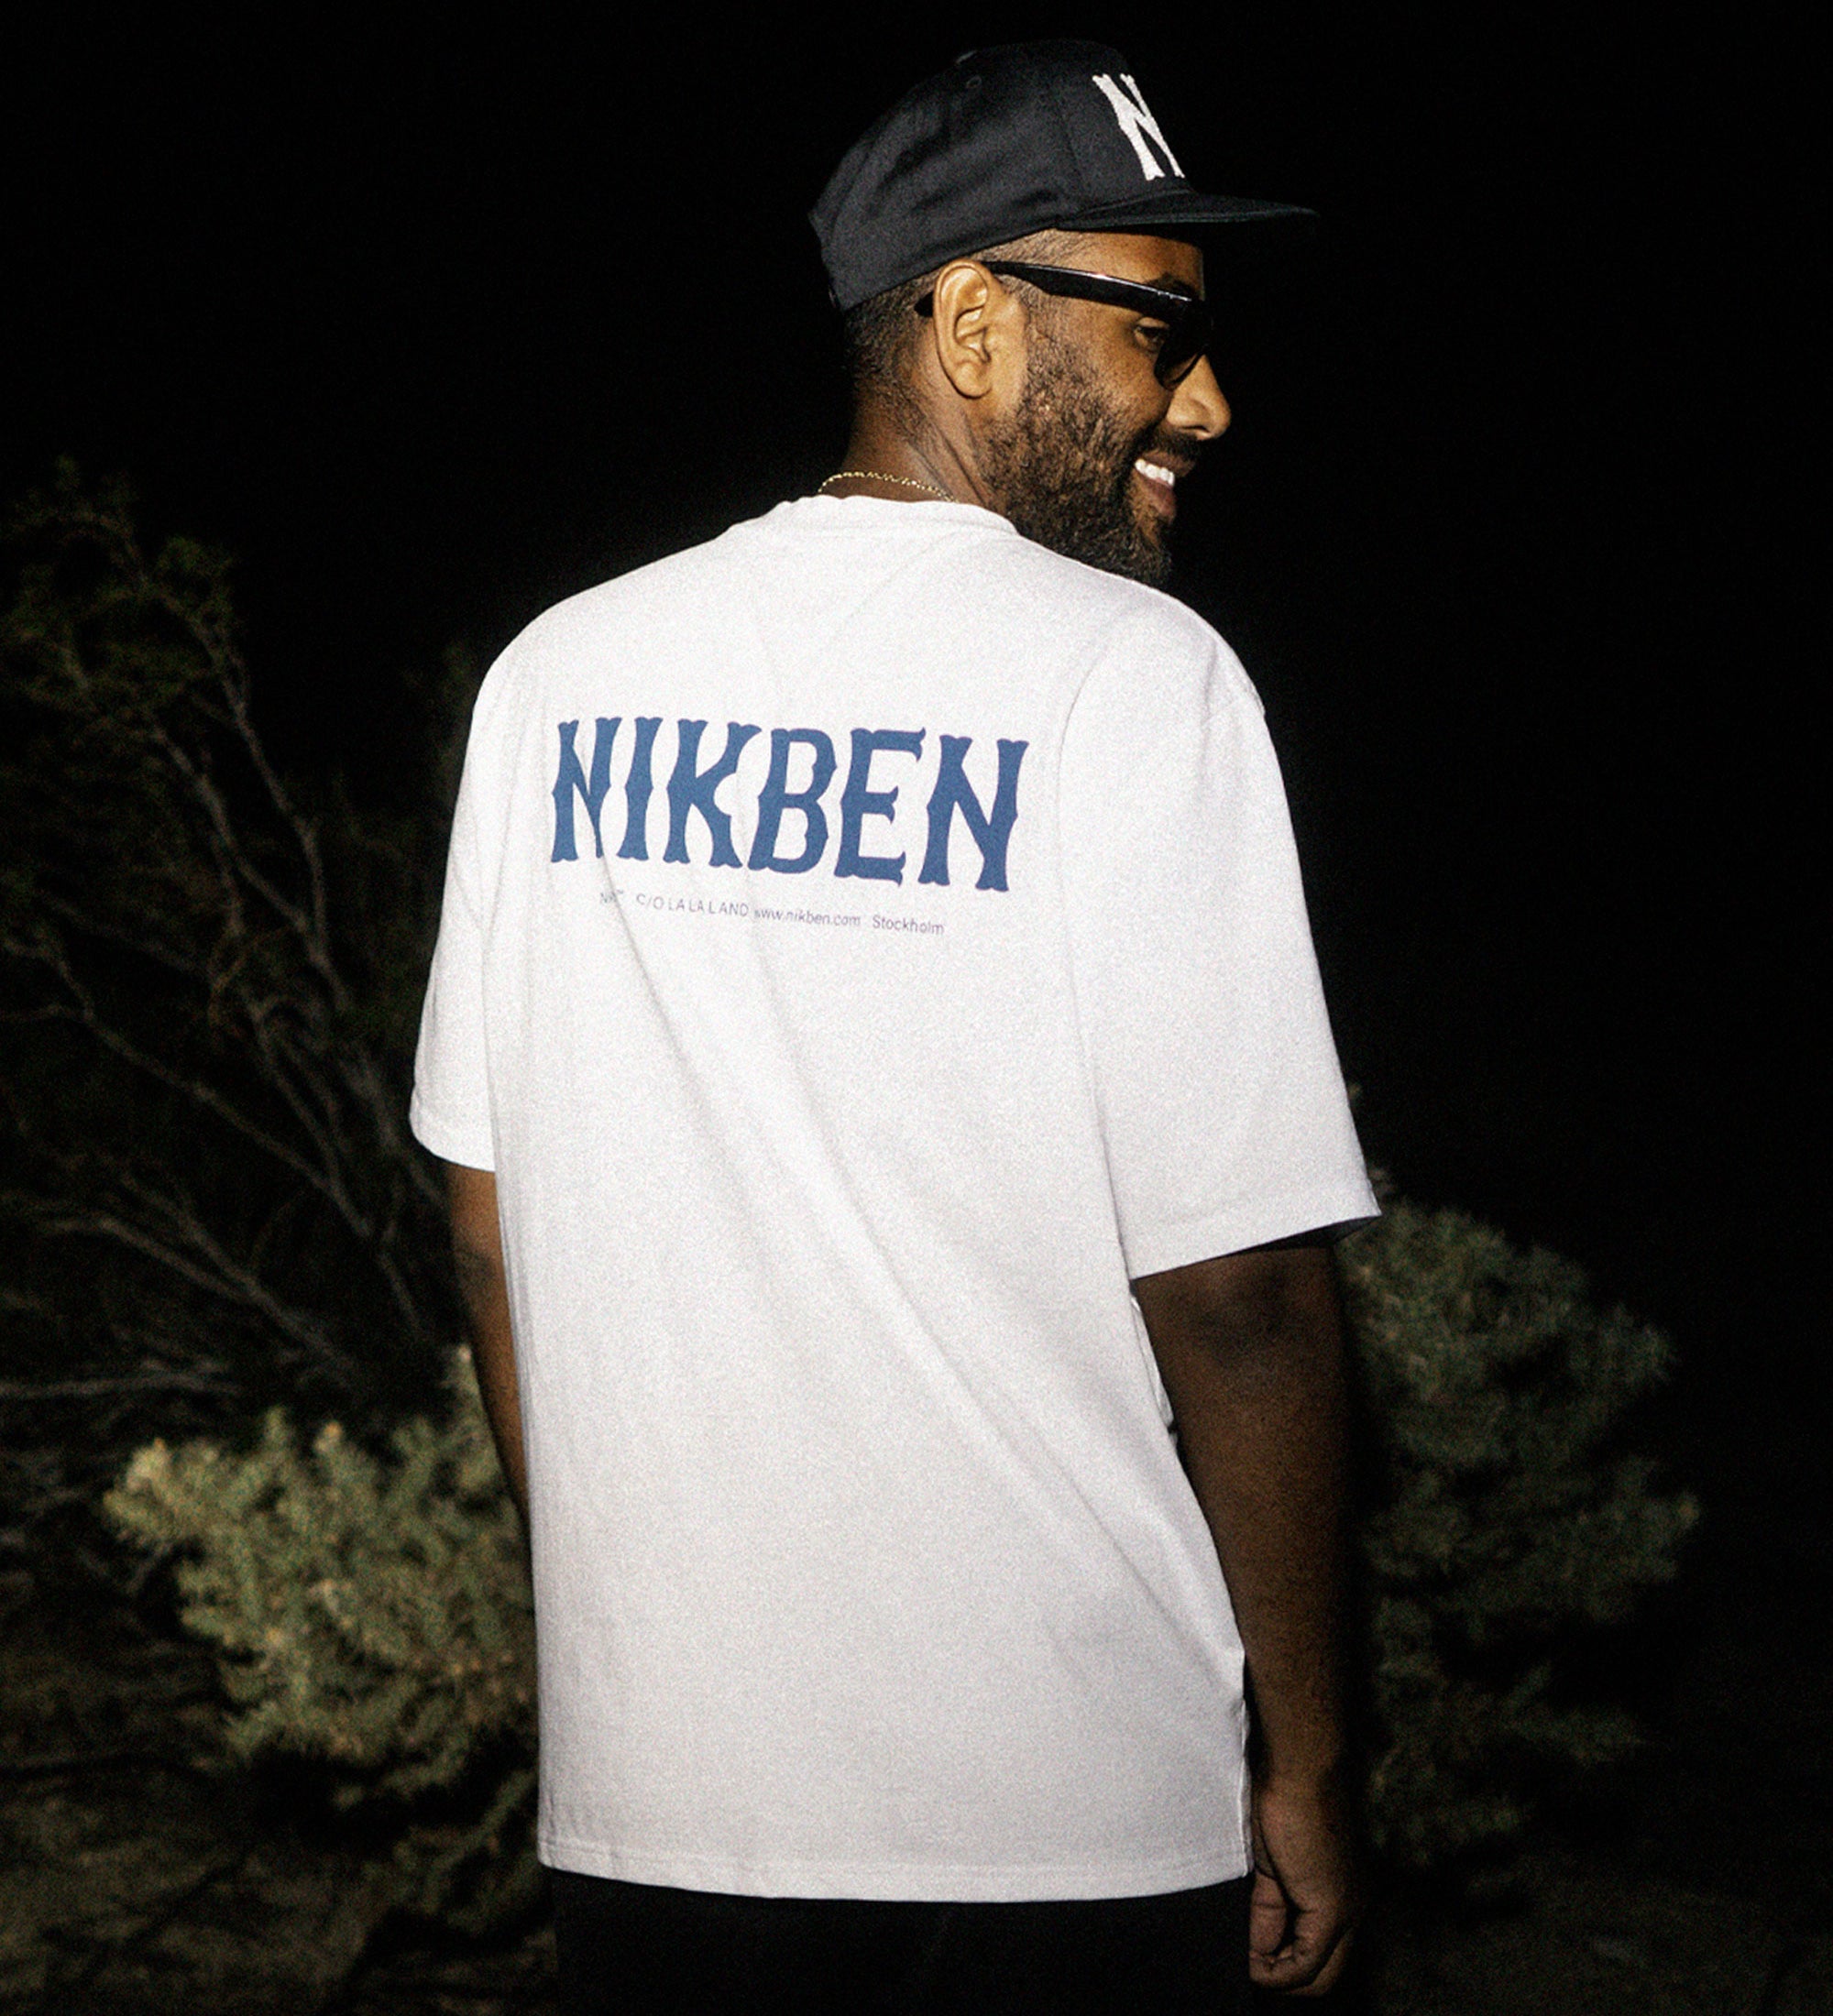 Back view of male model wearing a white t-shirt with blue "Nikben" text.